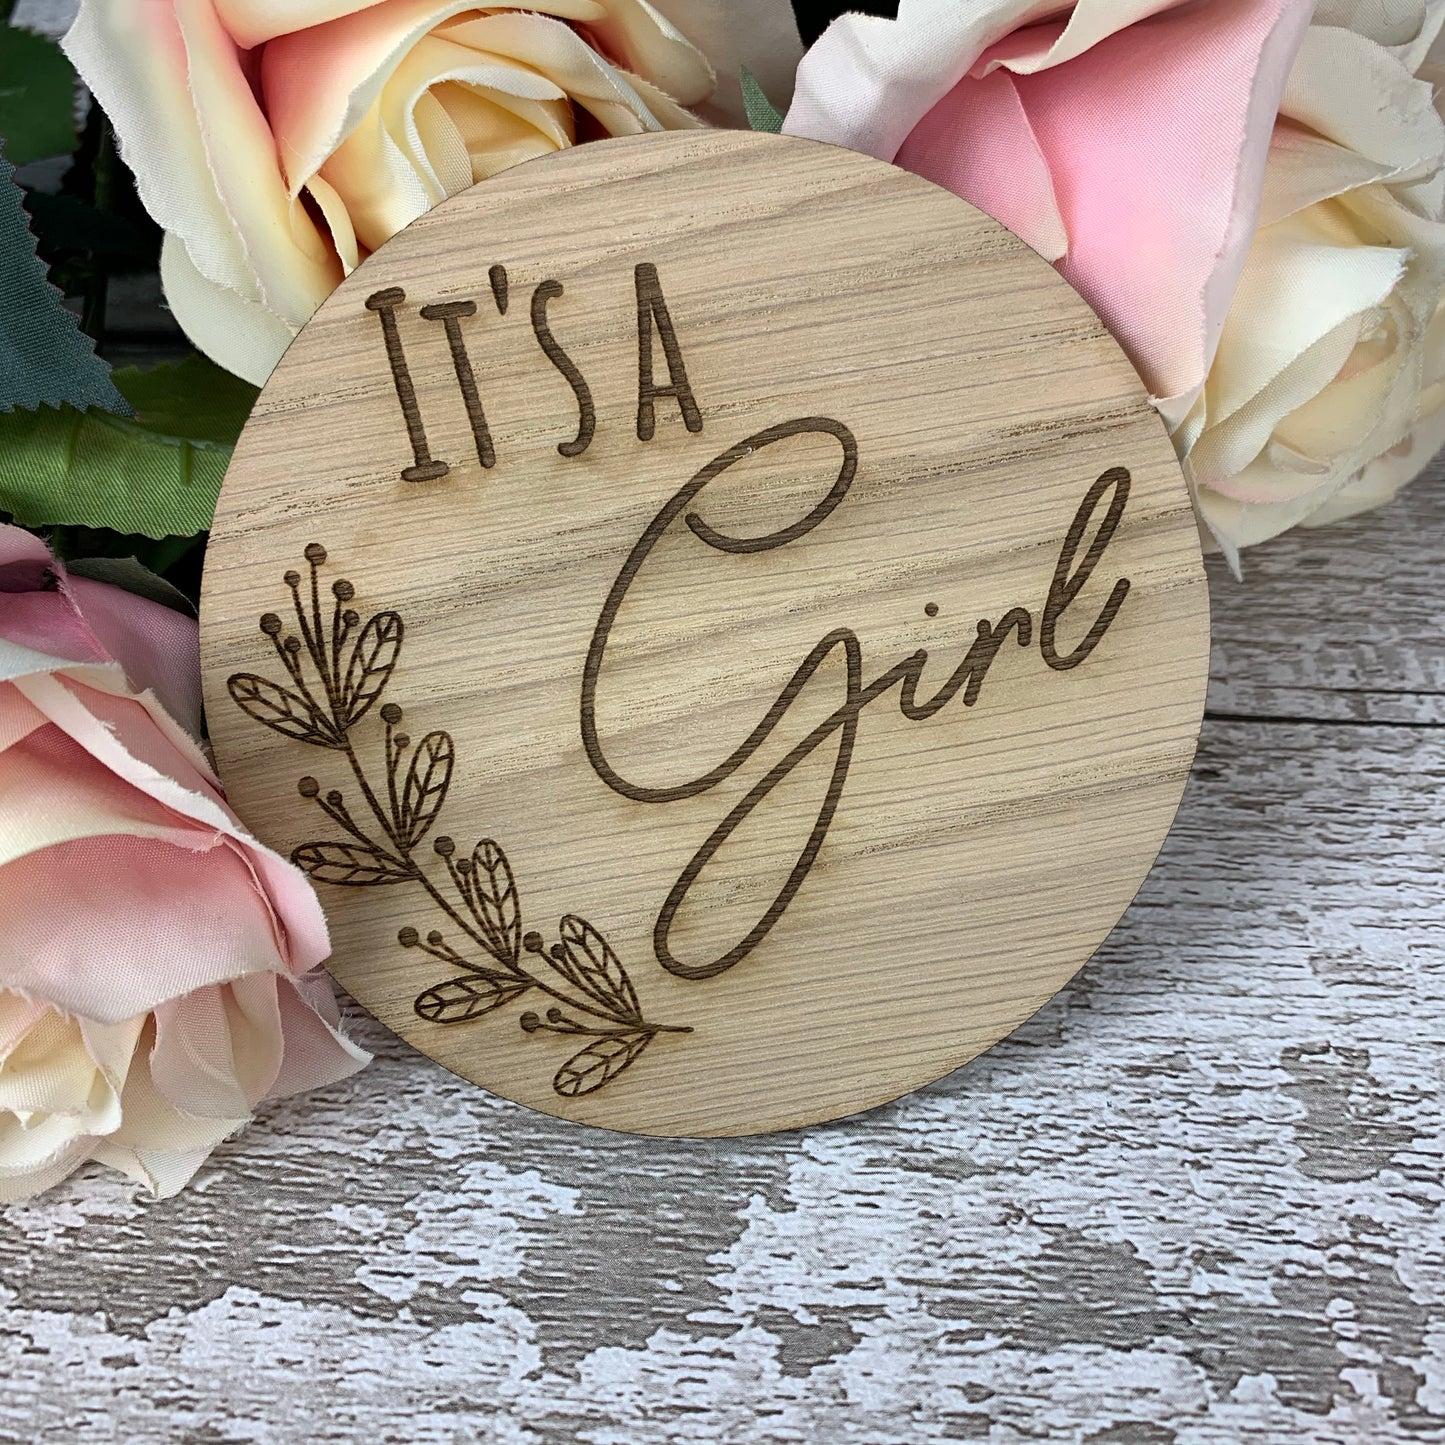 It’s a Girl Pregnancy / Baby announcement photo prop